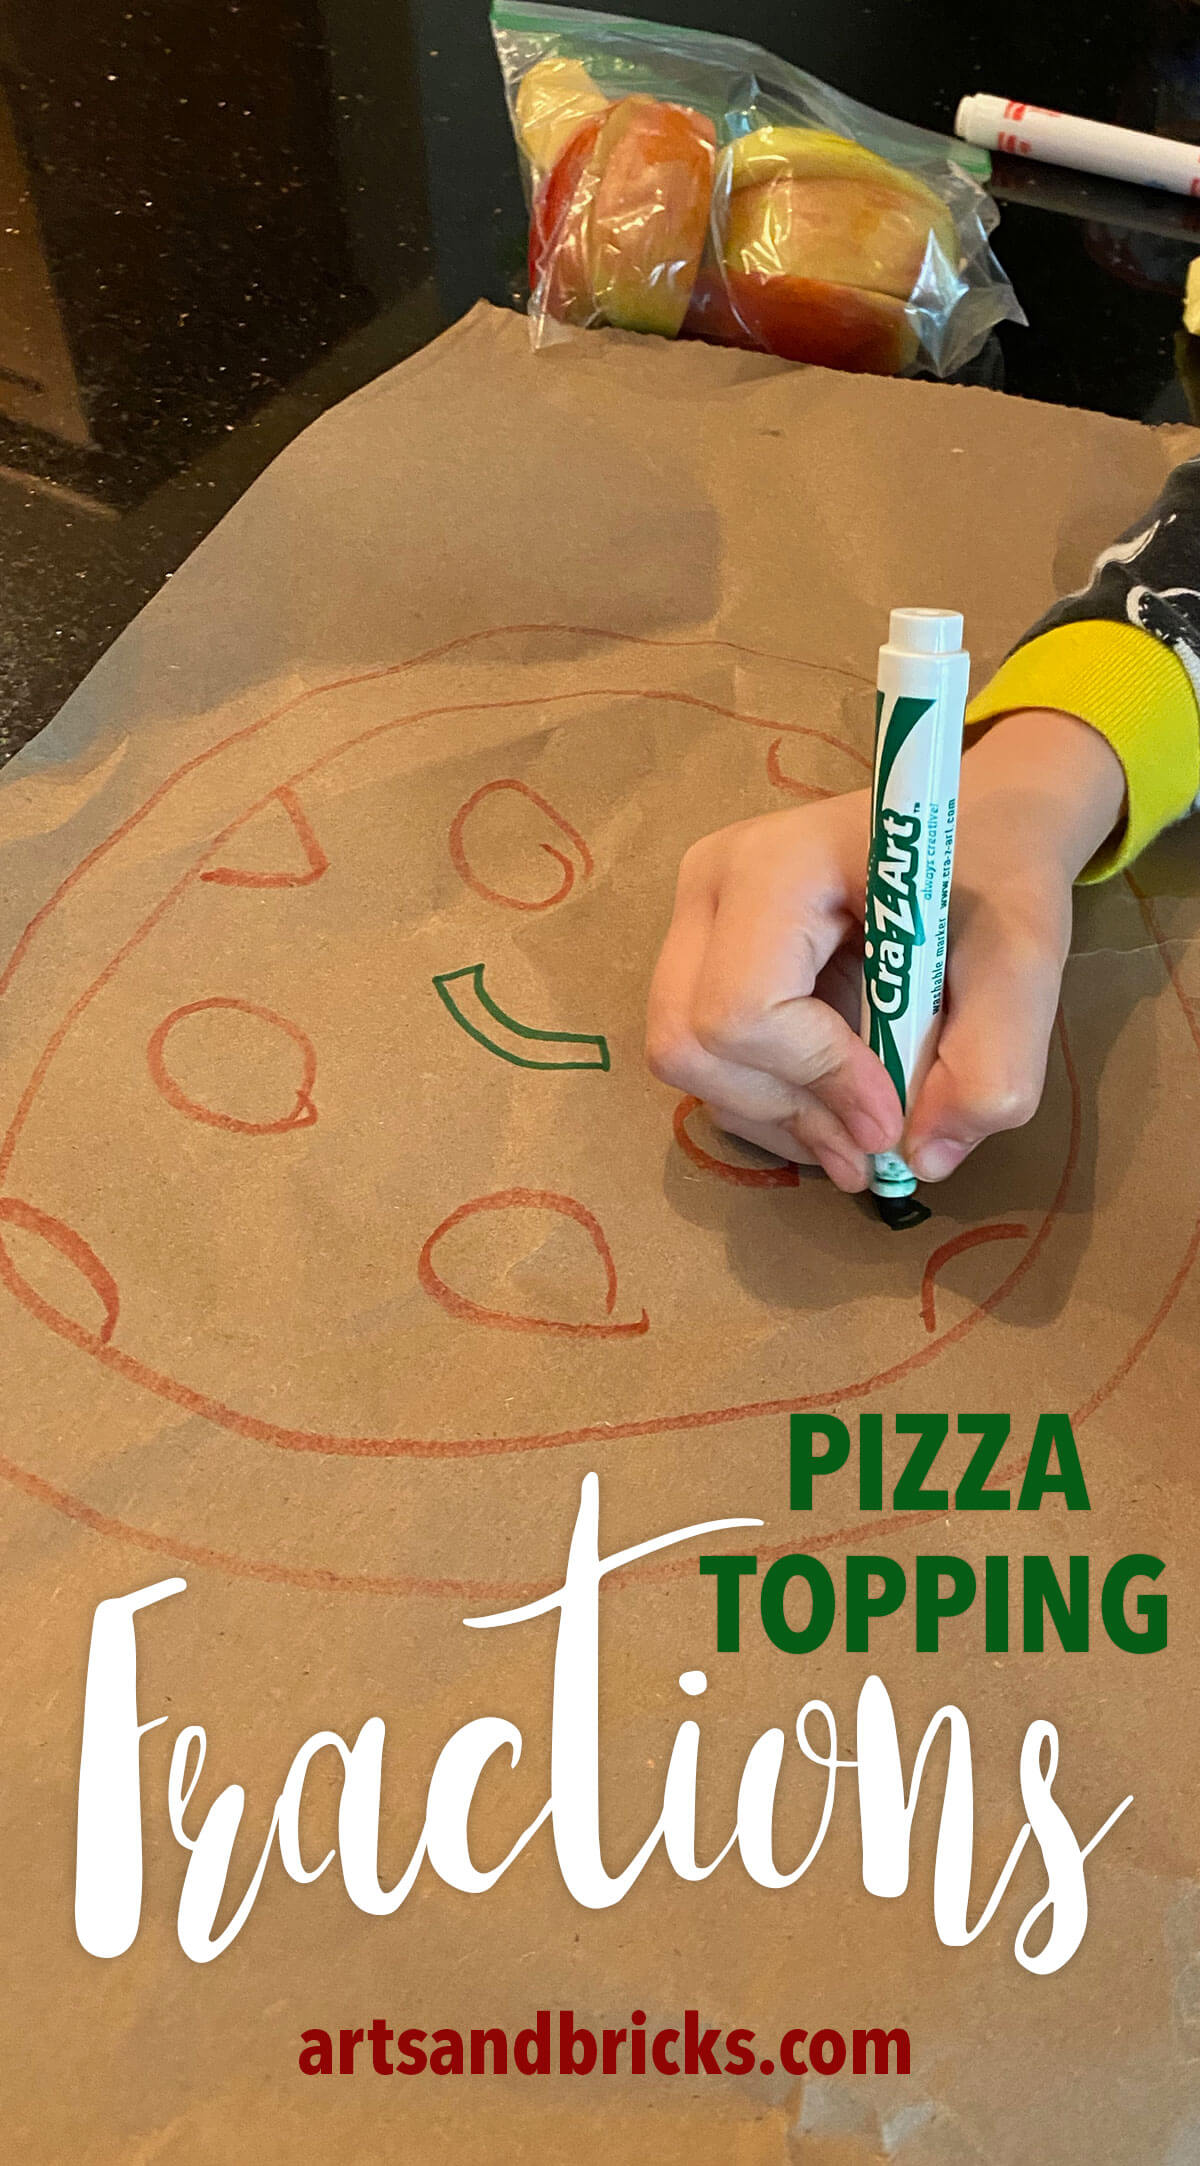 Perfect for first, second, or third-grade students this introductory fraction activity helps children visualize fractions by drawing pizza toppings. With no set-up required, you can do this simple activity with just paper and markers. Useful for teacher and homeschooling parents, alike, get inspired by this quick, effective fraction teaching idea. #fractions #steam #math #activity